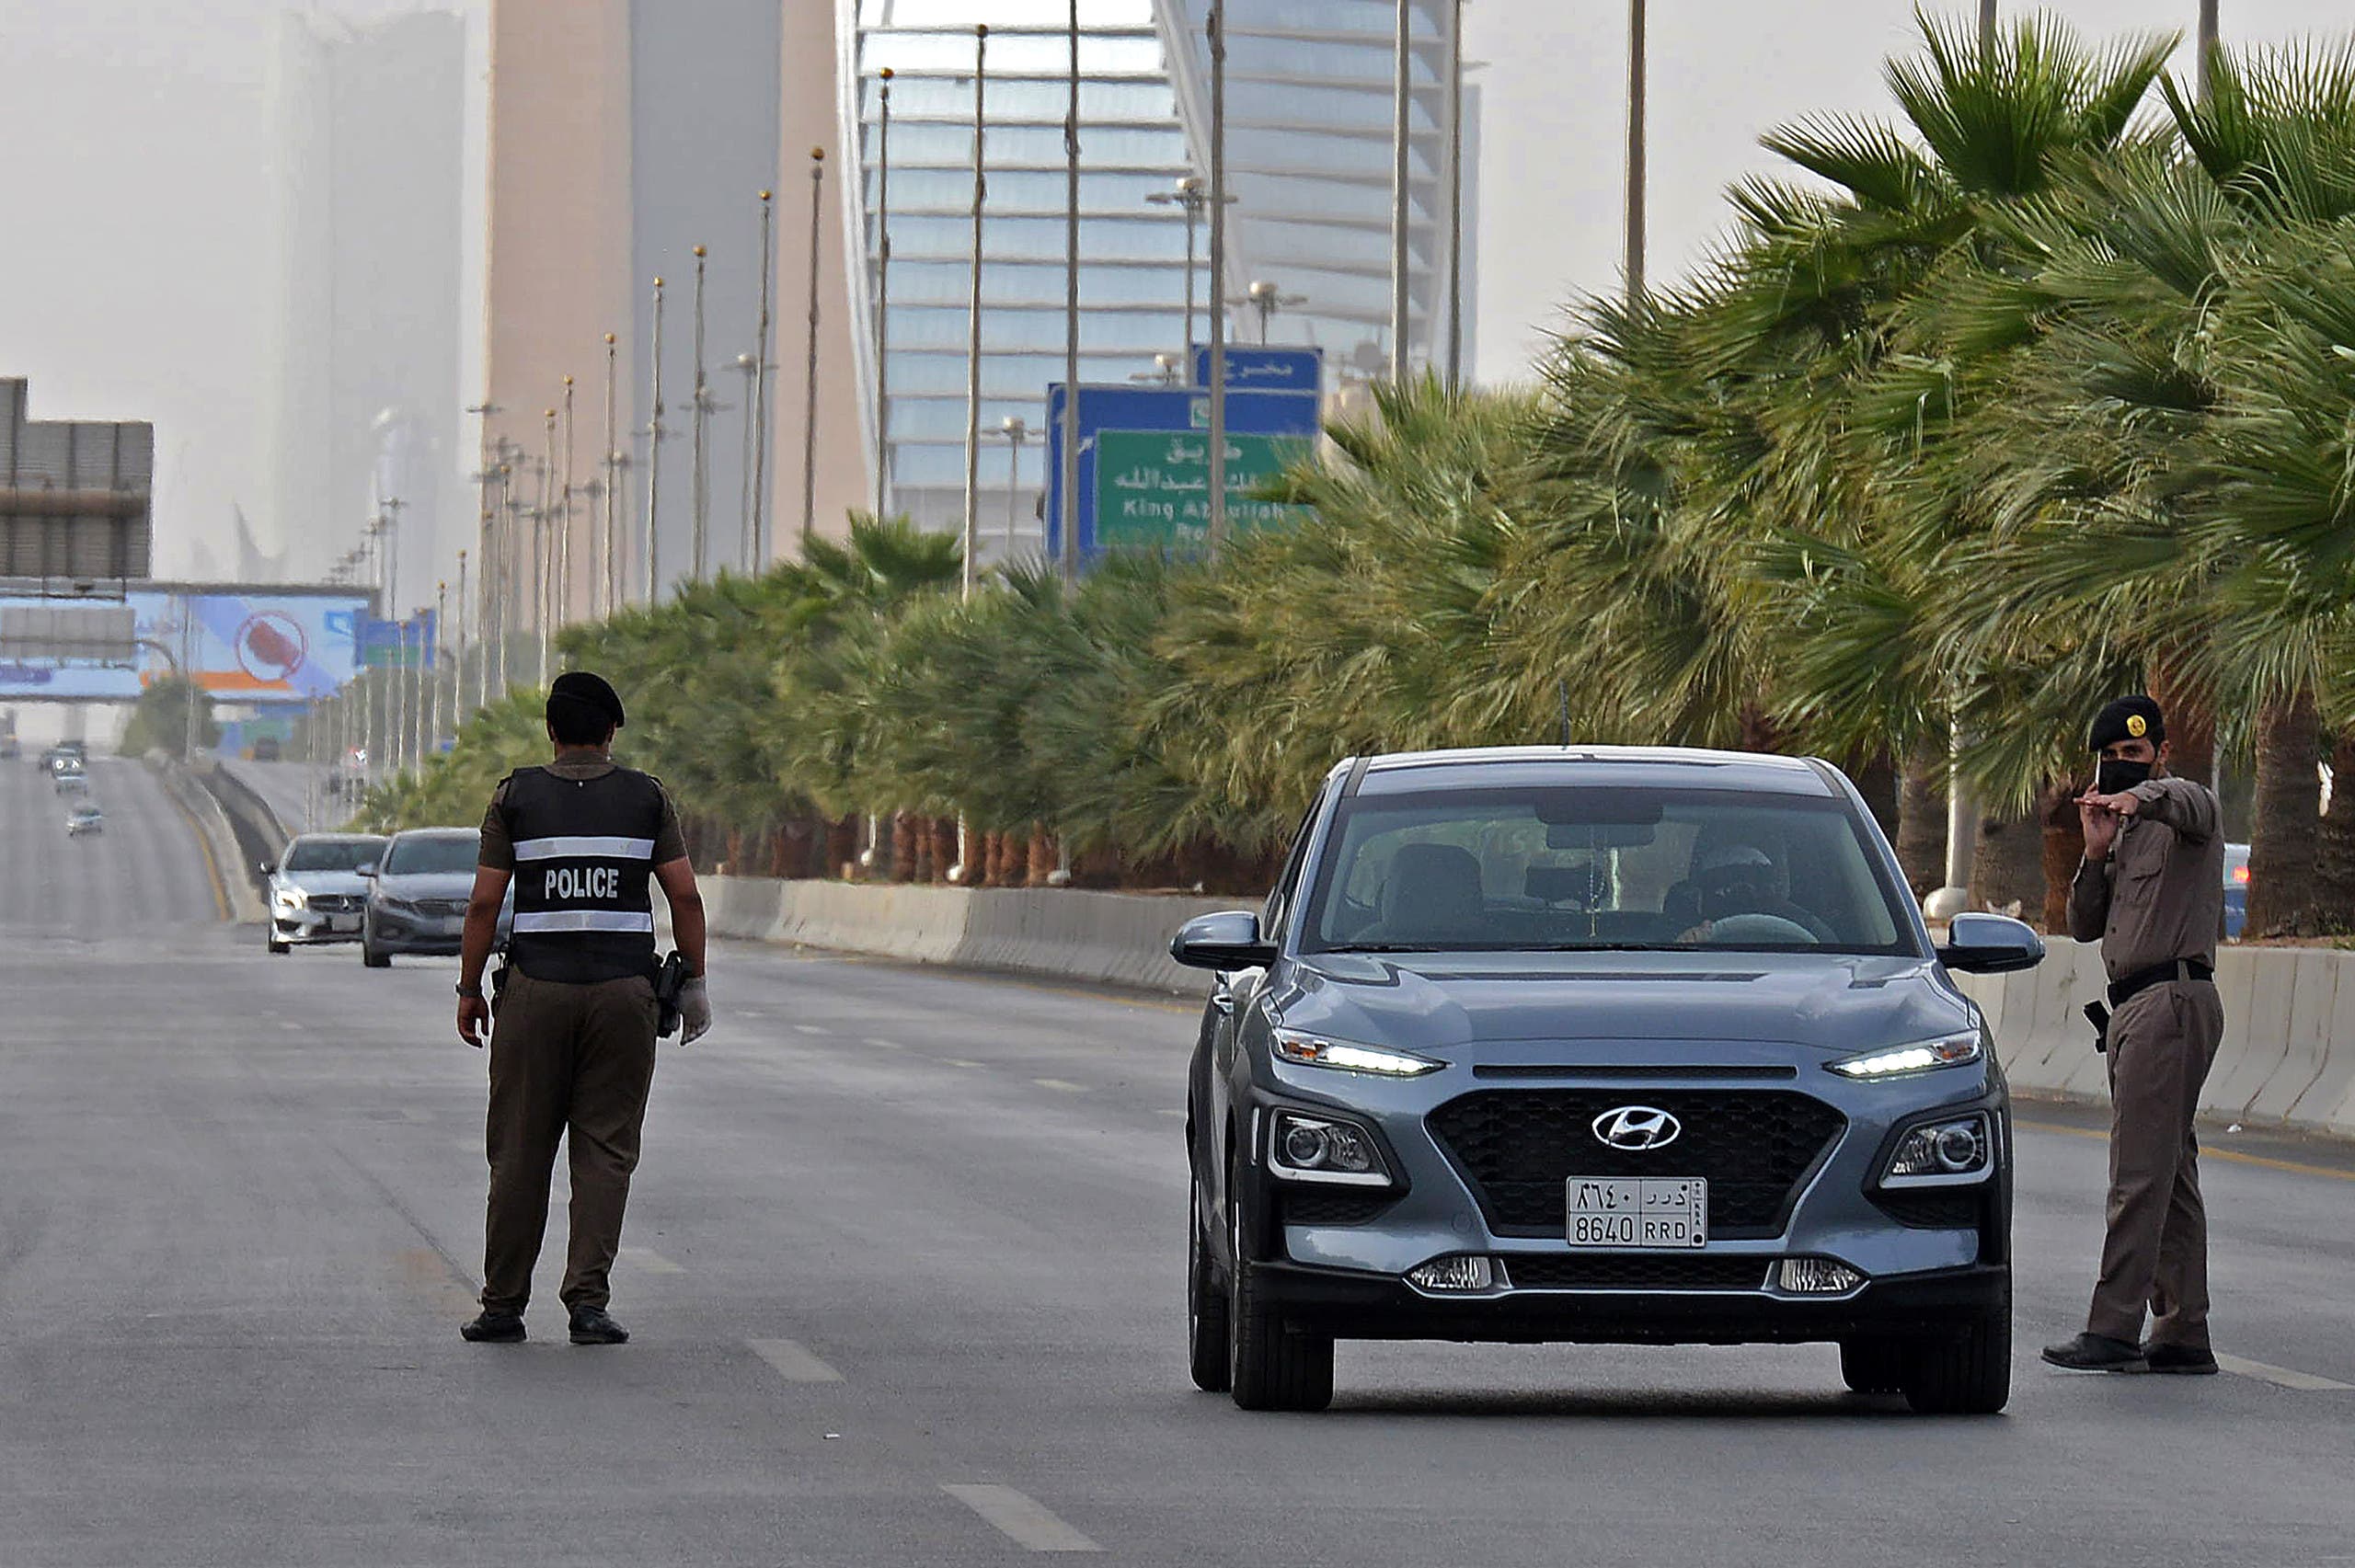 Saudi policemen manning a checkpoint on King Fahd road in the capital Riyadh, after the Kingdom began implementing an 11-hour nationwide curfew. (AFP)